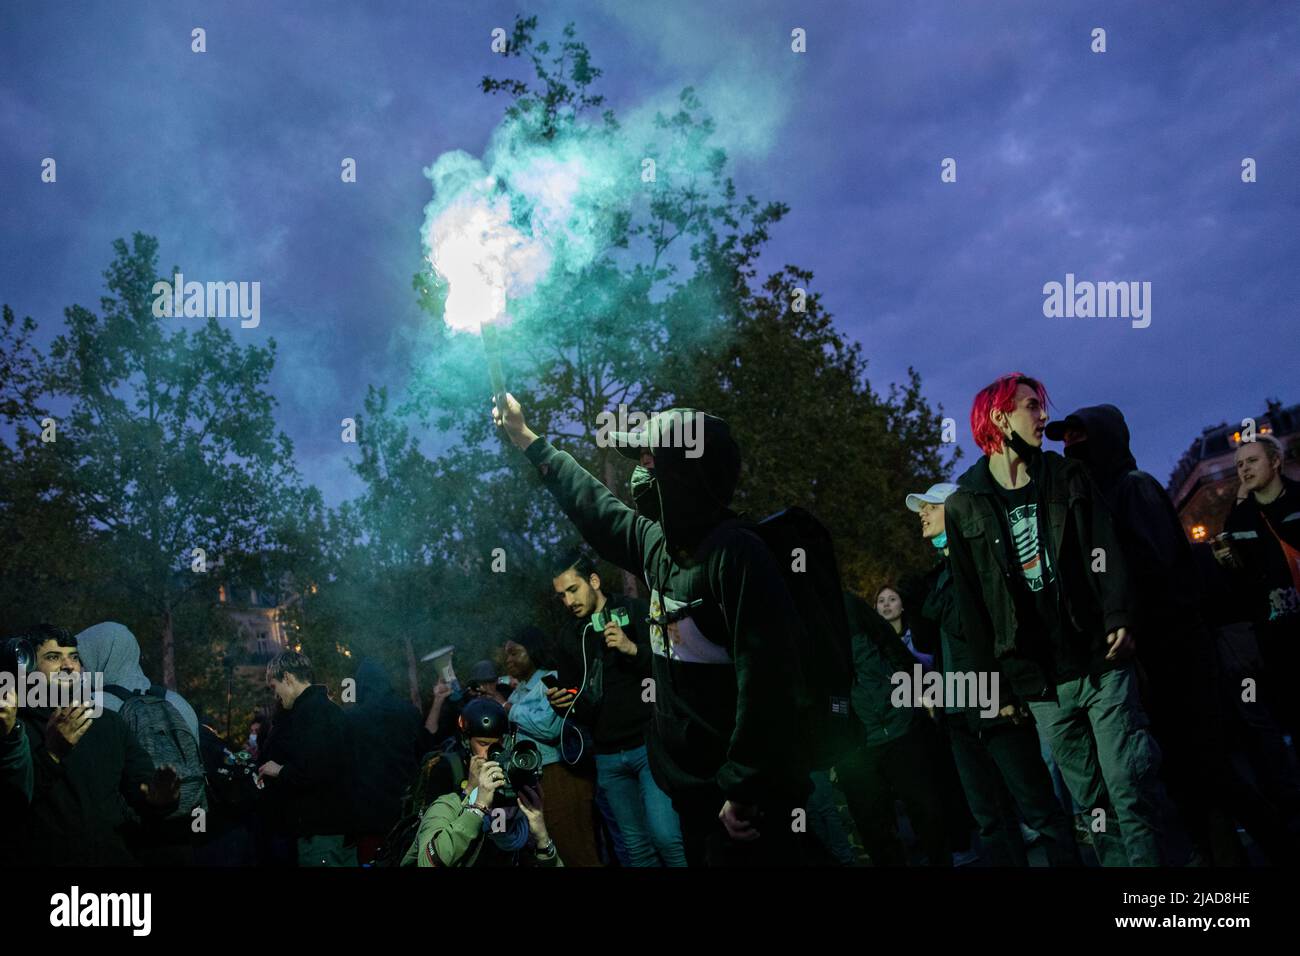 Protestor hold a bomb smoke during a protest in Paris Stock Photo